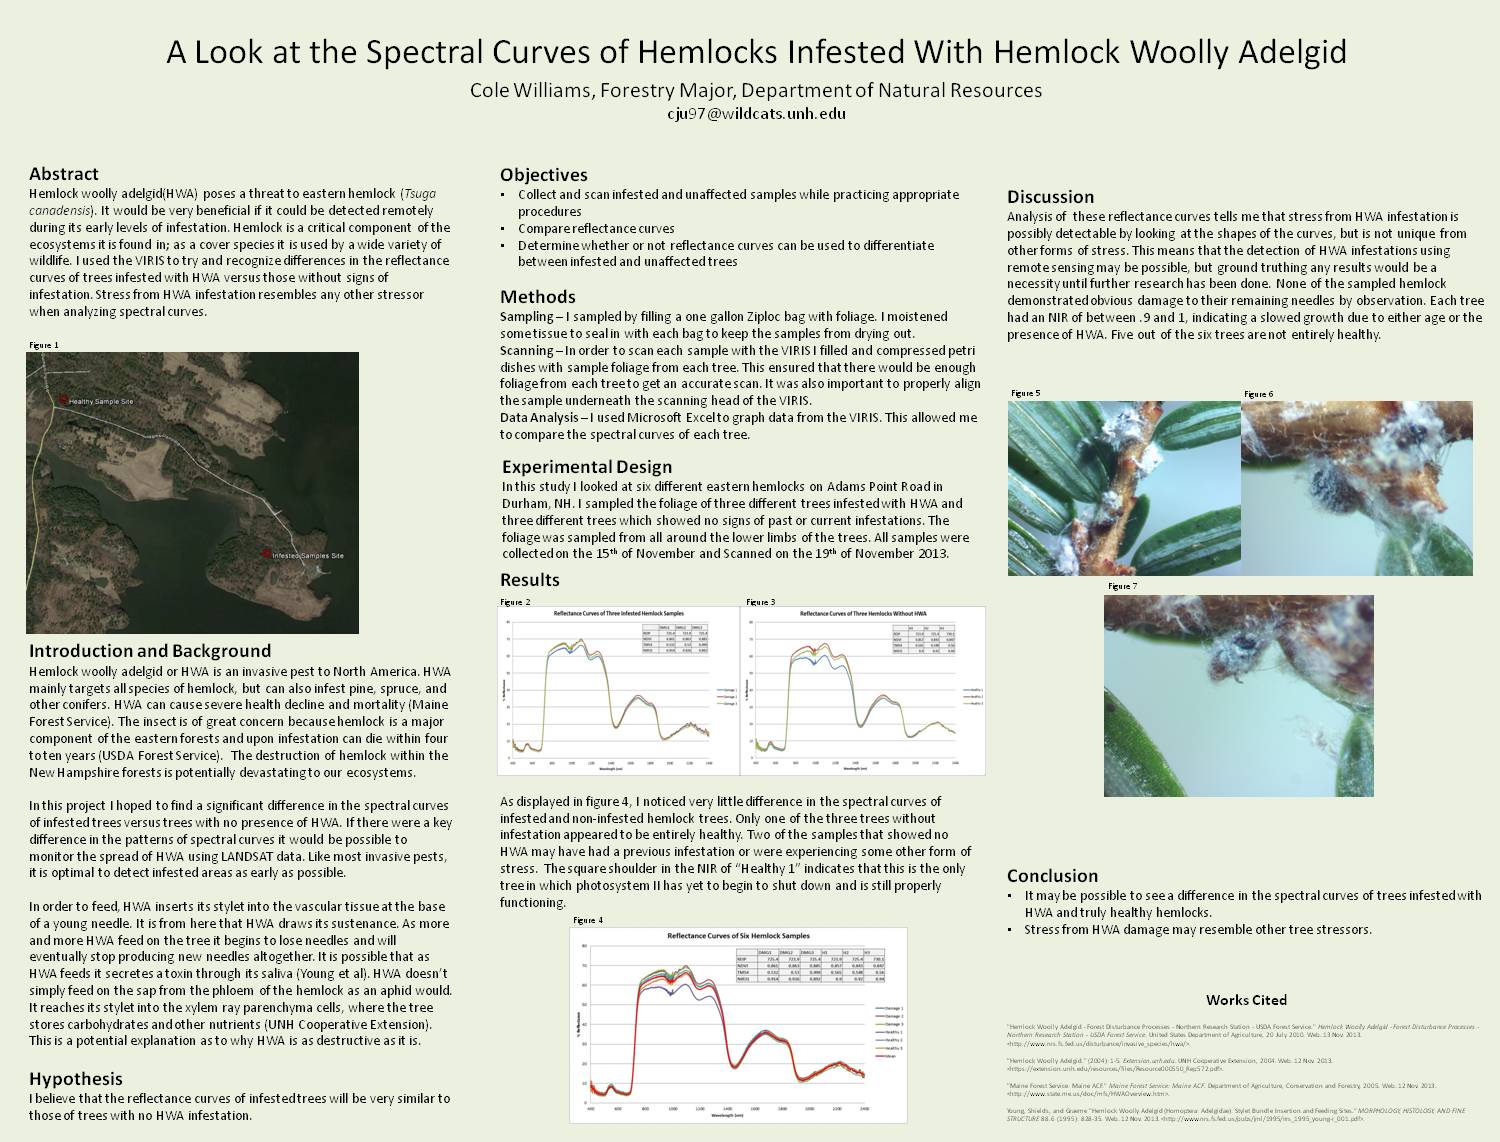 A Look At The Spectral Curves Of Hemlocks Infested With Hemlock Woolly Adelgid by cju97